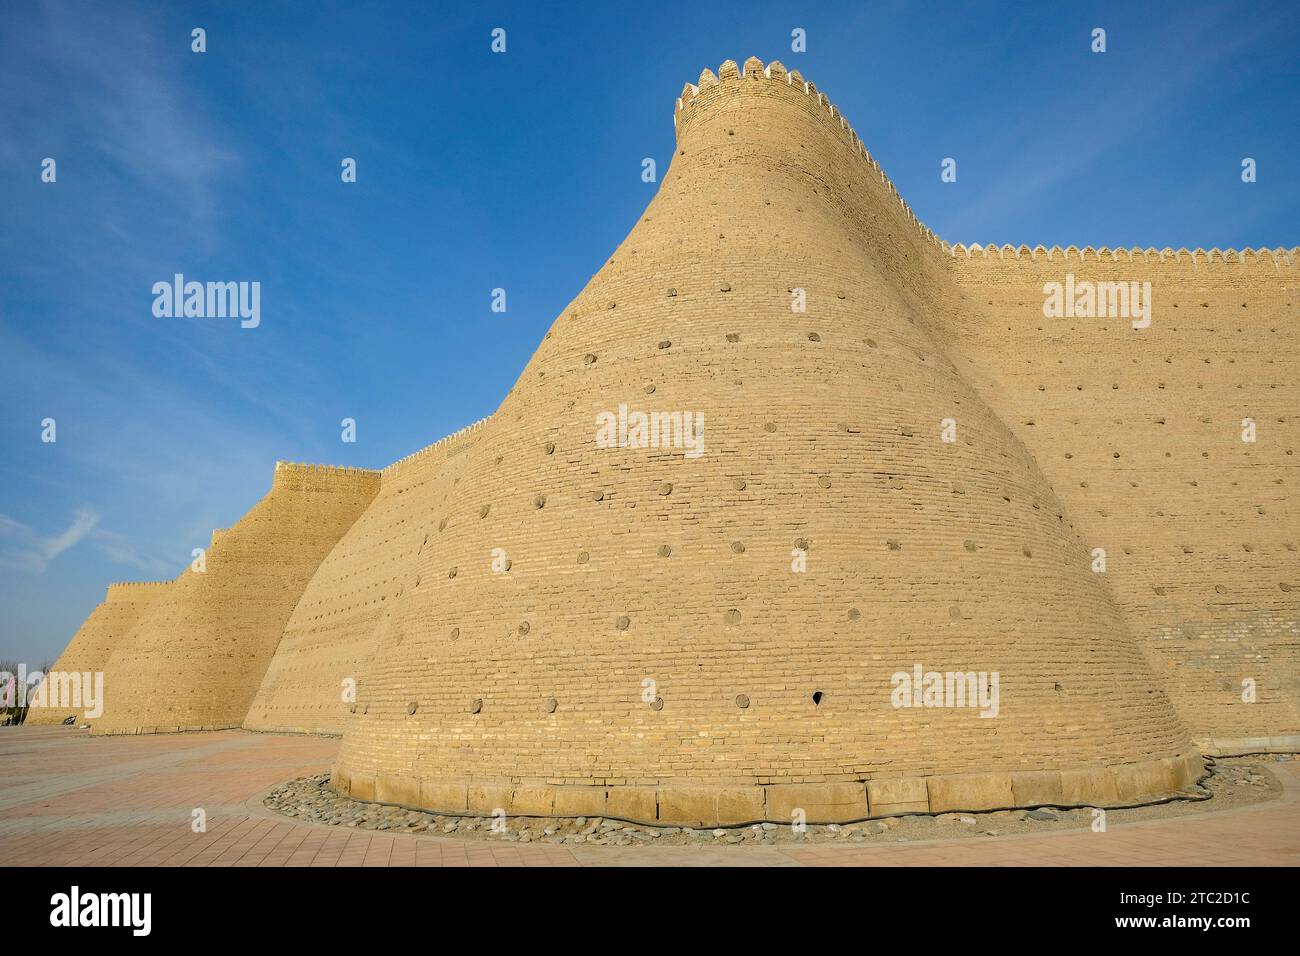 Detail of the wall of the Ark of Bukhara in Uzbekistan. Stock Photo